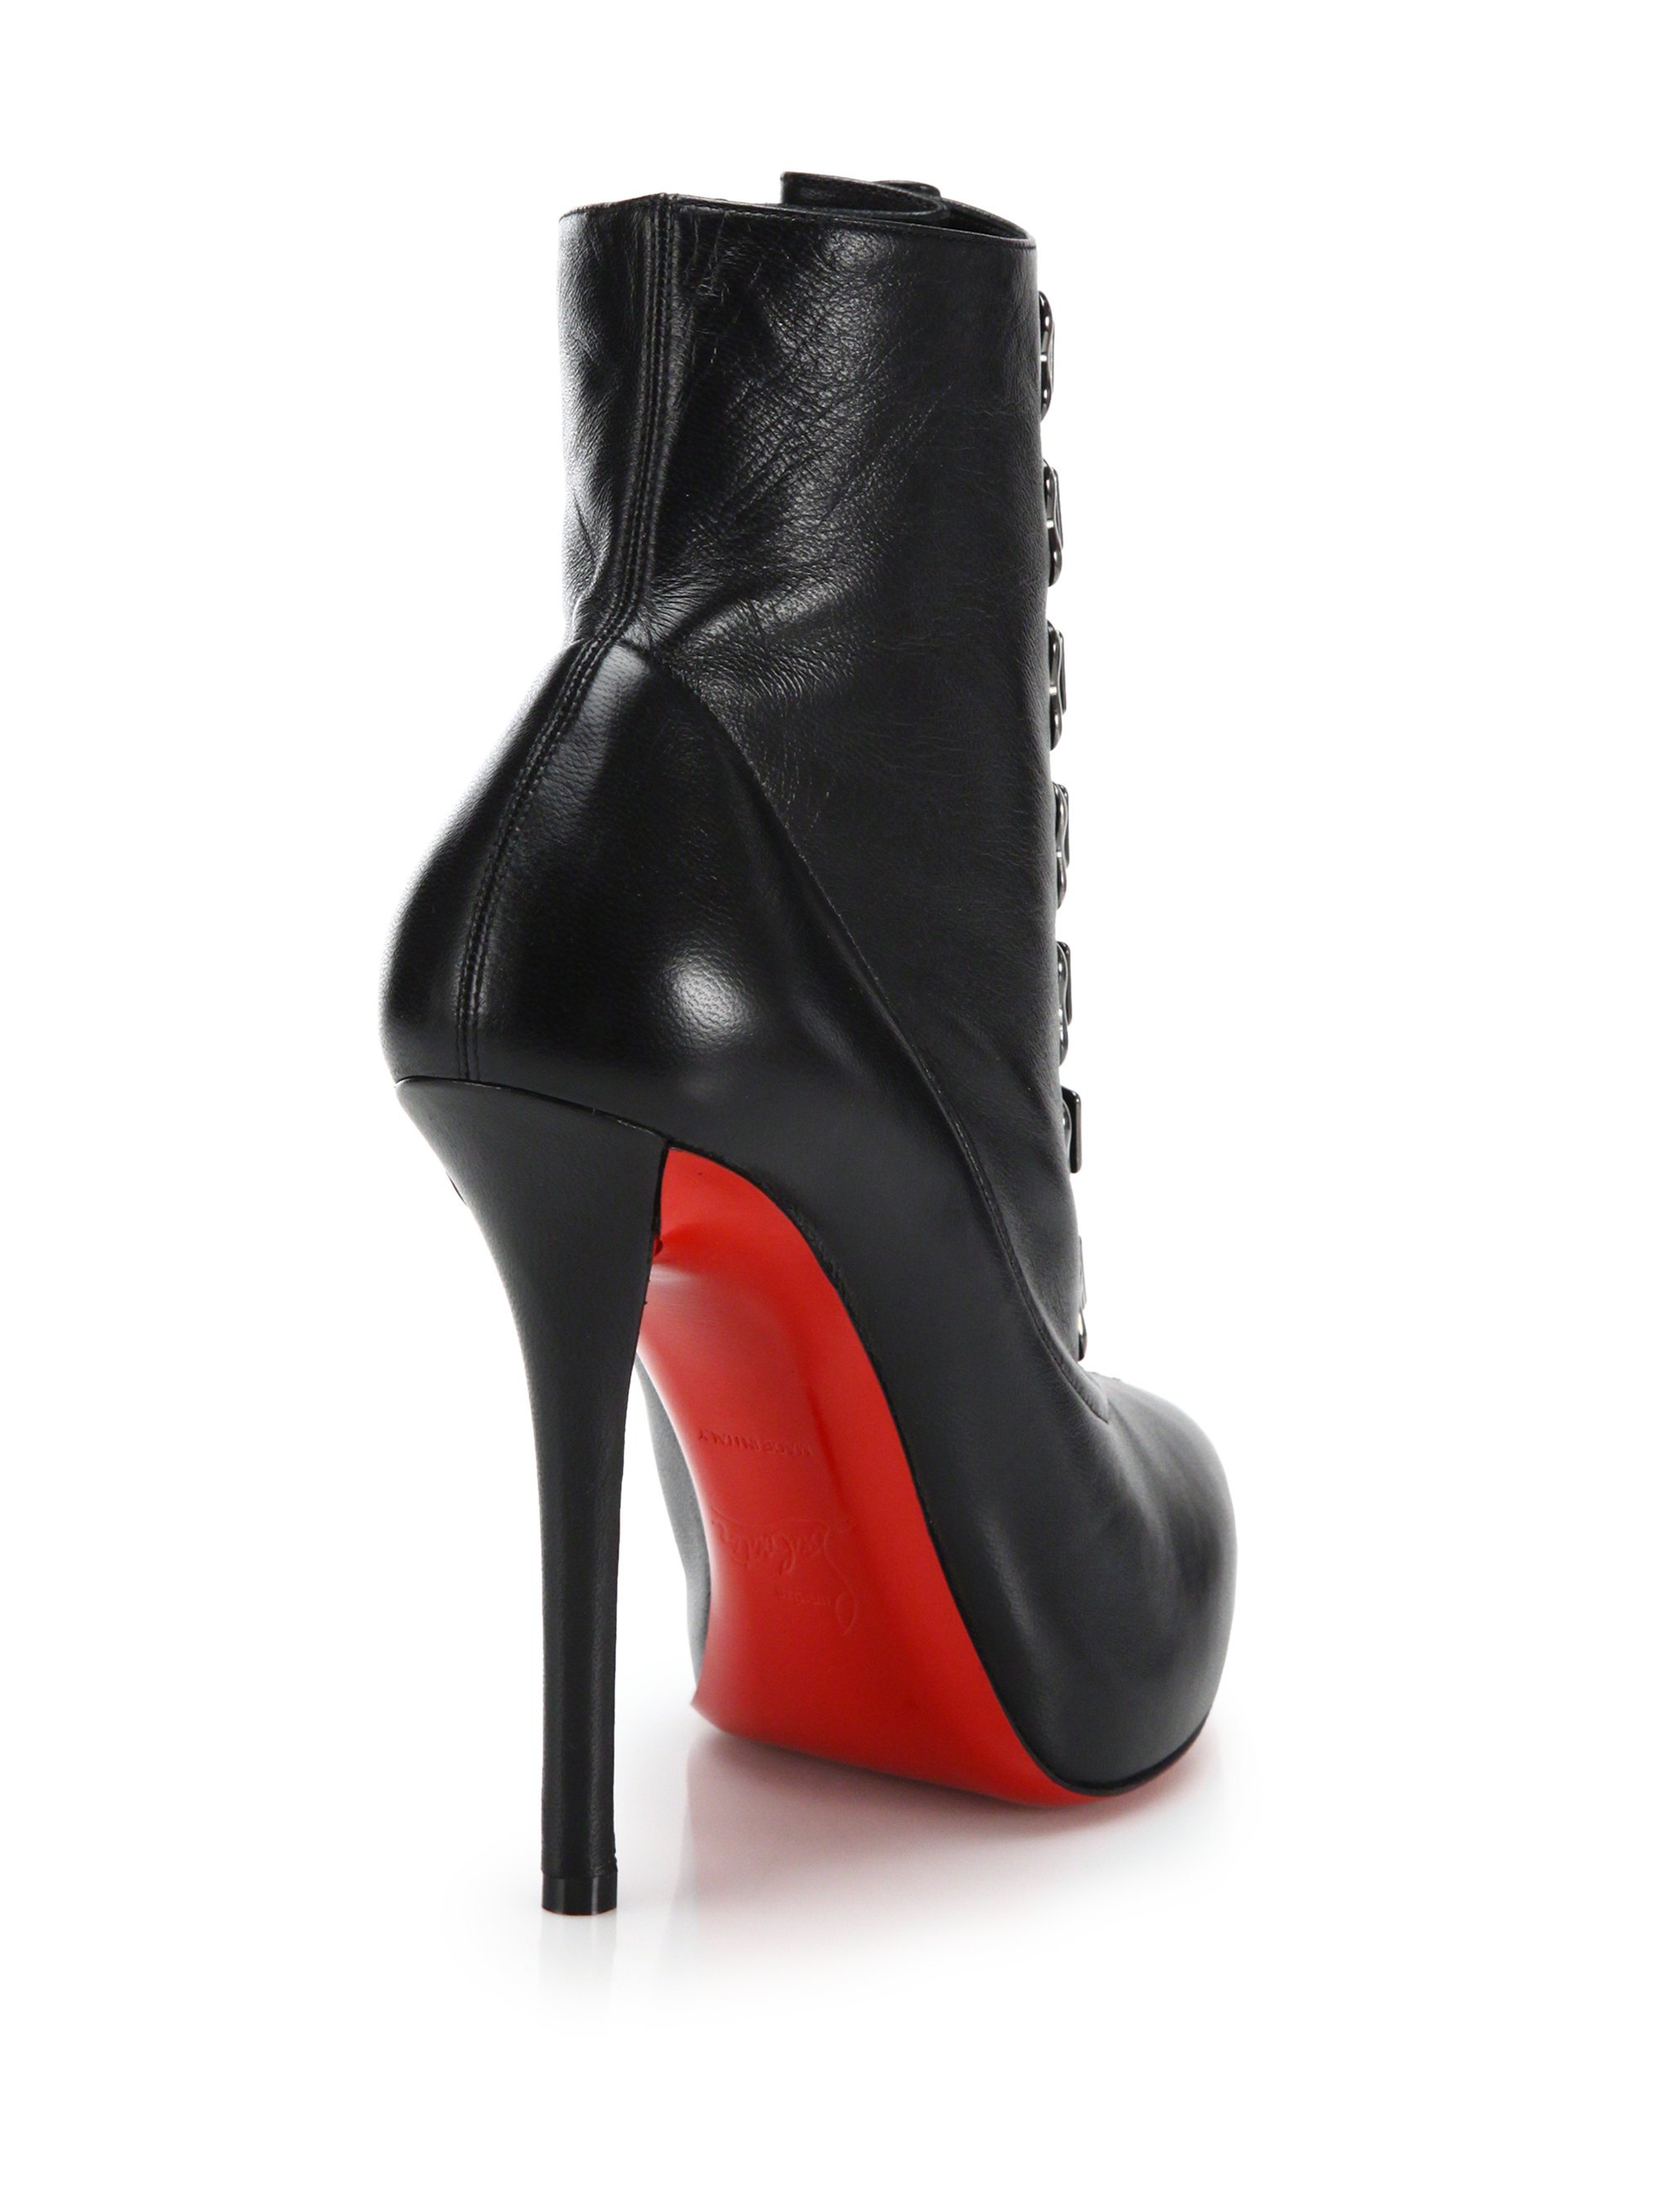 Lyst - Christian Louboutin Leather Lace-up Booties in Black